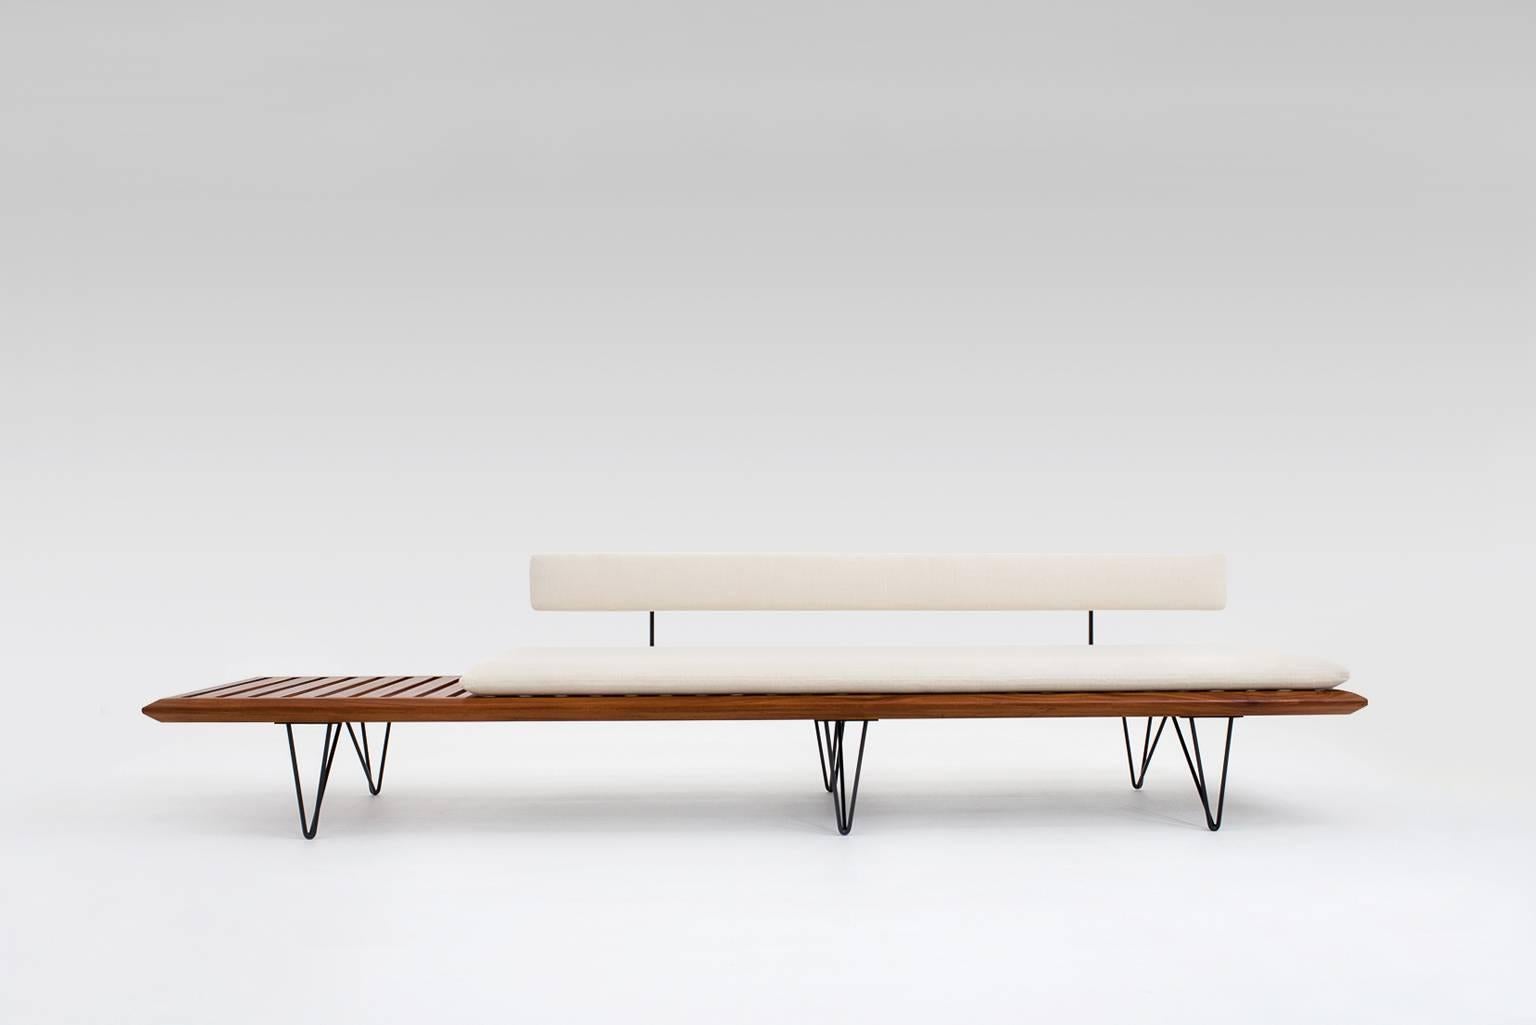 Extremely rare bench by Carlo Hauner and Martin Eisler for Forma, Brazil, 1950s. Made from fine solid Brazilian walnut with a beautiful grain and black metal legs. The backrest can be switched from side so you can choose to have the table section on